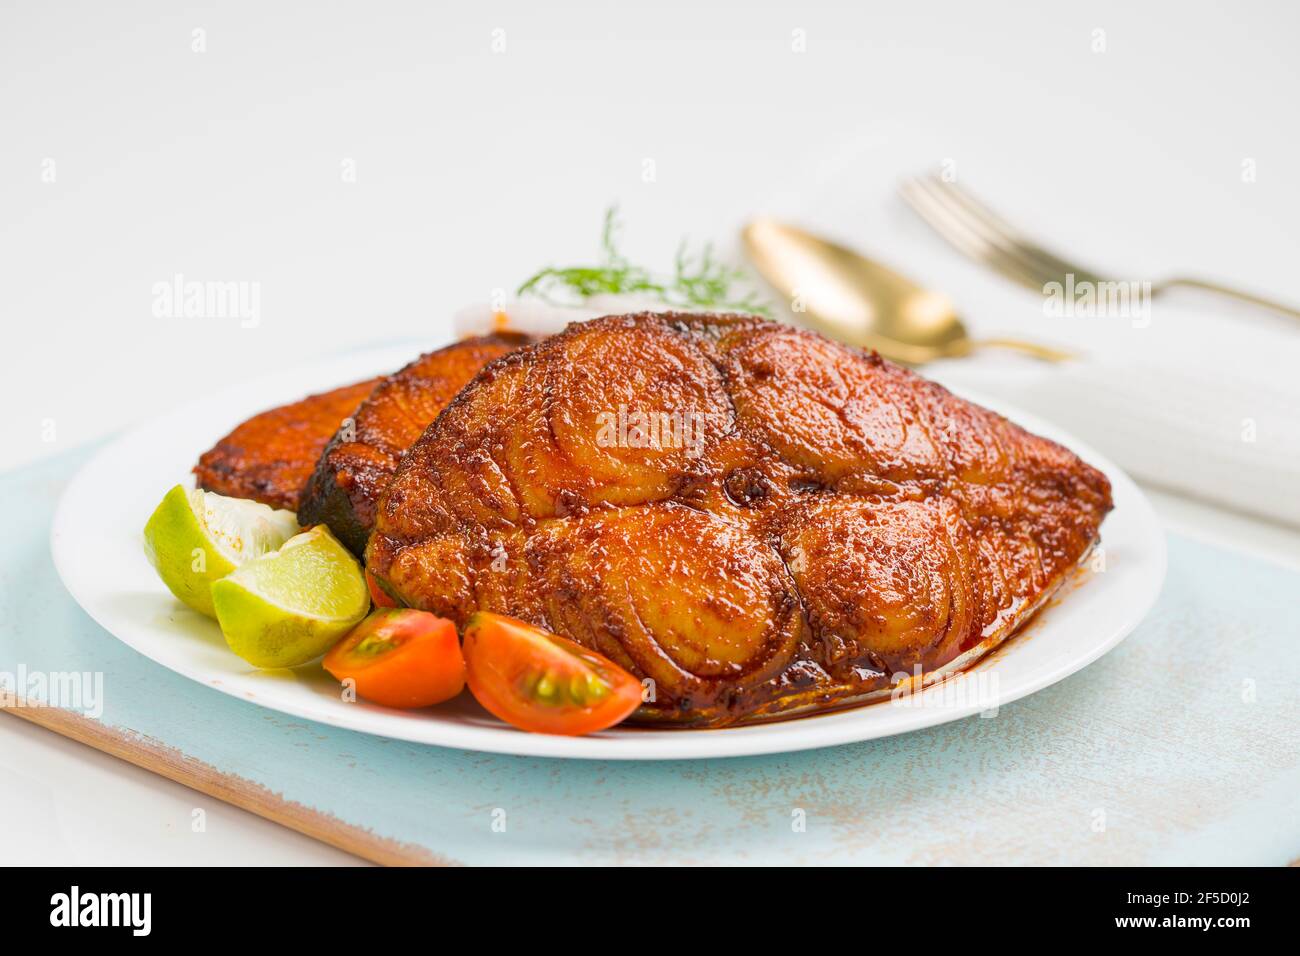 Seer fish fry arranged beautifully and garnished with onion, lemon and tomato slices on white ceramic plate placed on sky blue board with white textur Stock Photo